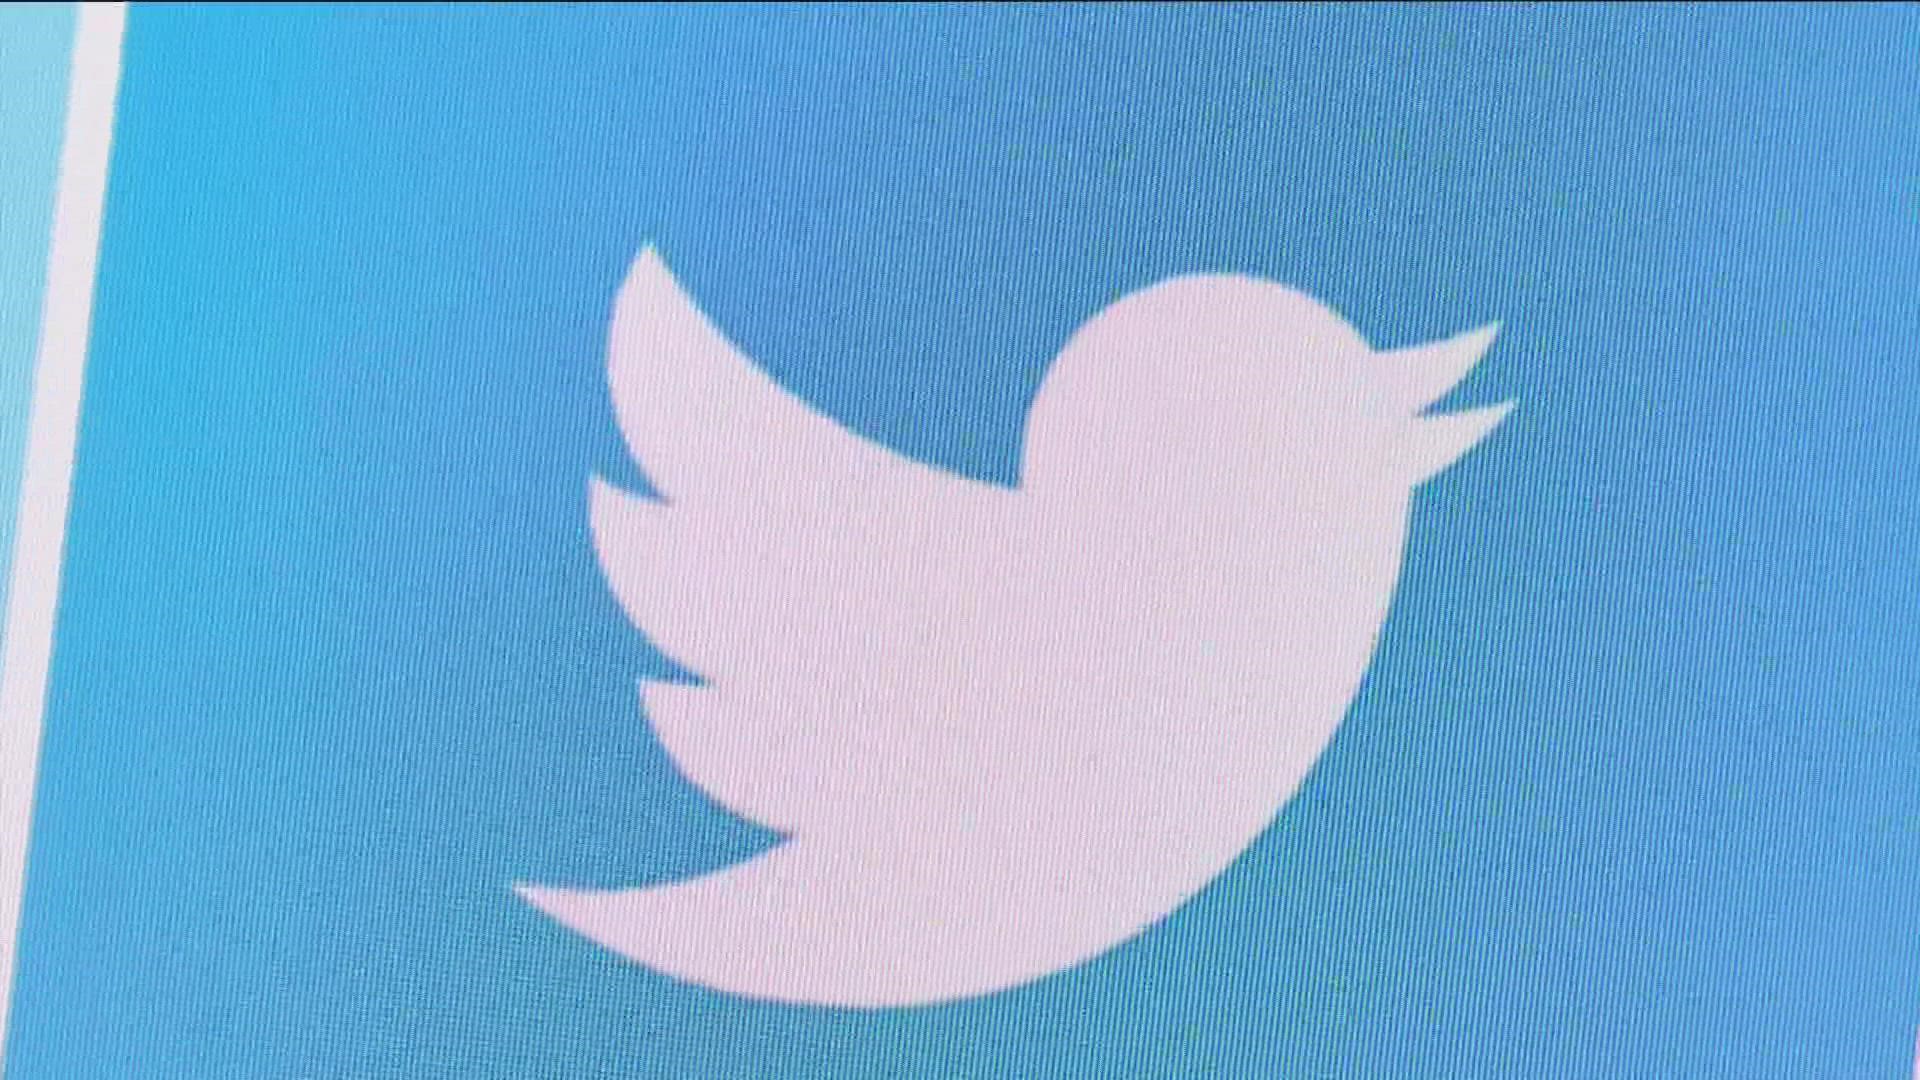 Texas Attorney General Ken Paxton launched an investigation into Twitter for potentially false reporting fake accounts and violating a state law.